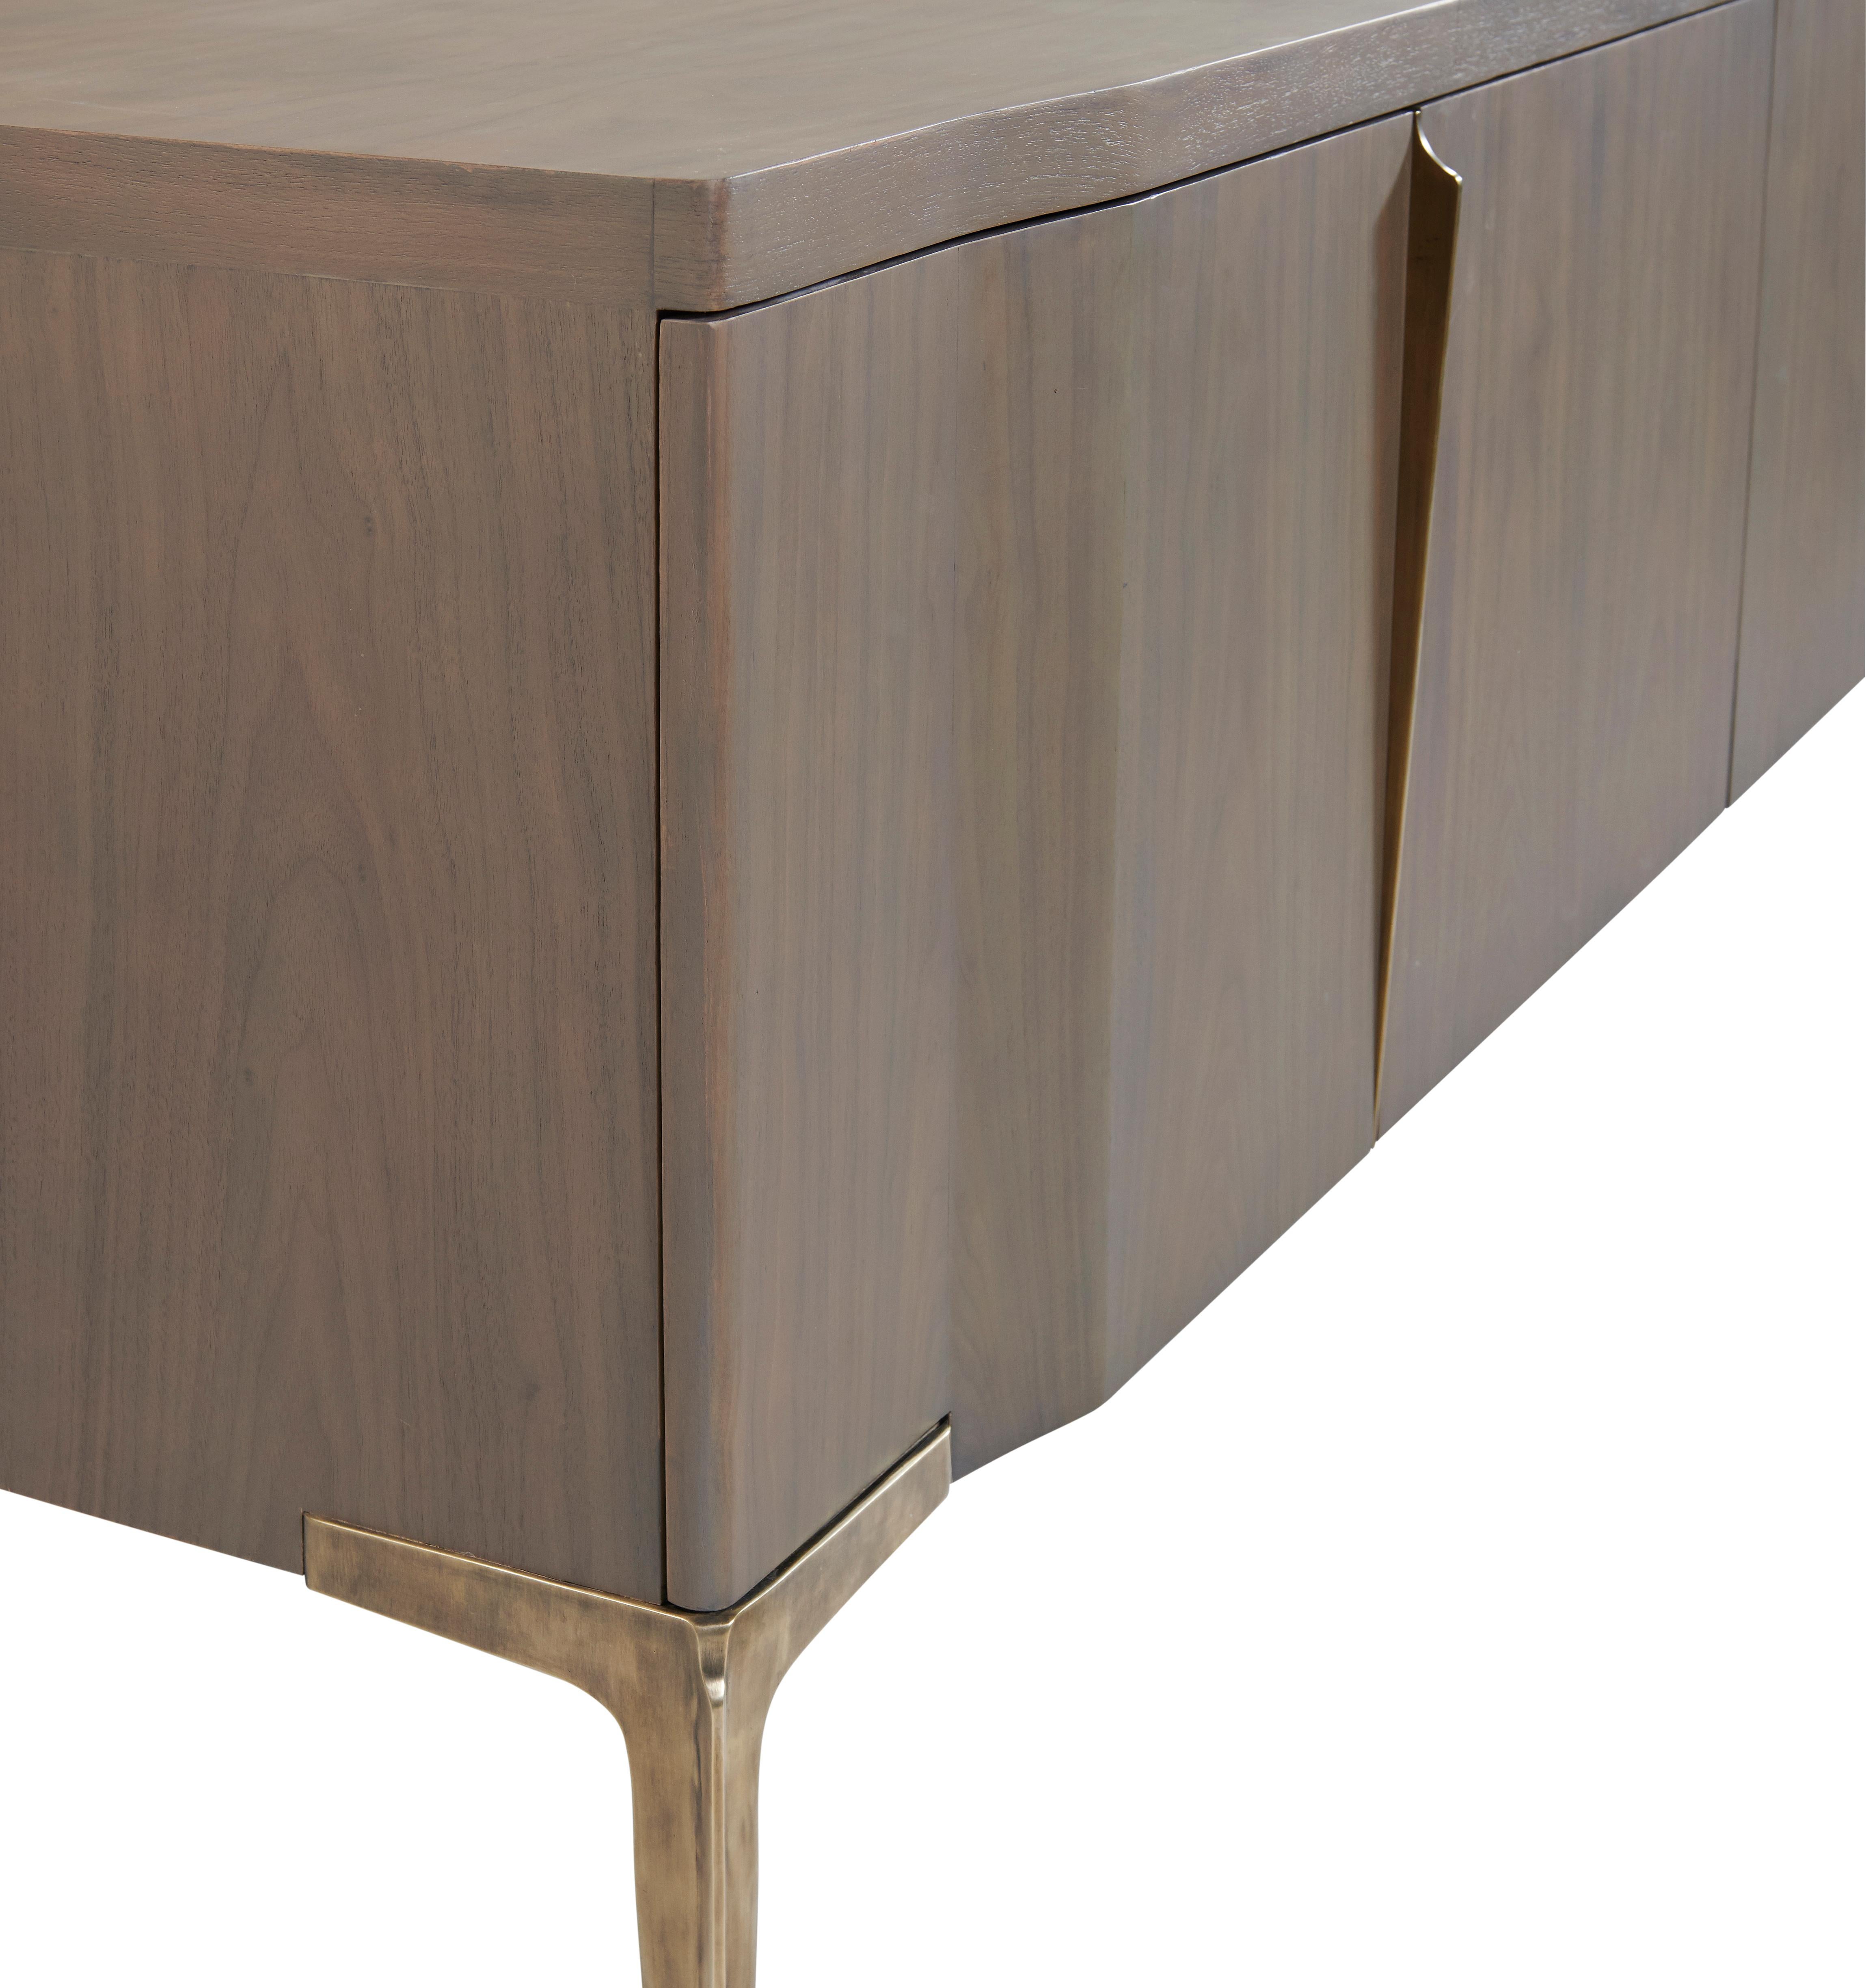 Khepera Credenza’s undulating door fronts and subtle pull reference the language of its slender and statuesque cast legs with their distinctive ridge detail which tapers down their length. This well-proportioned credenza also incorporates cable